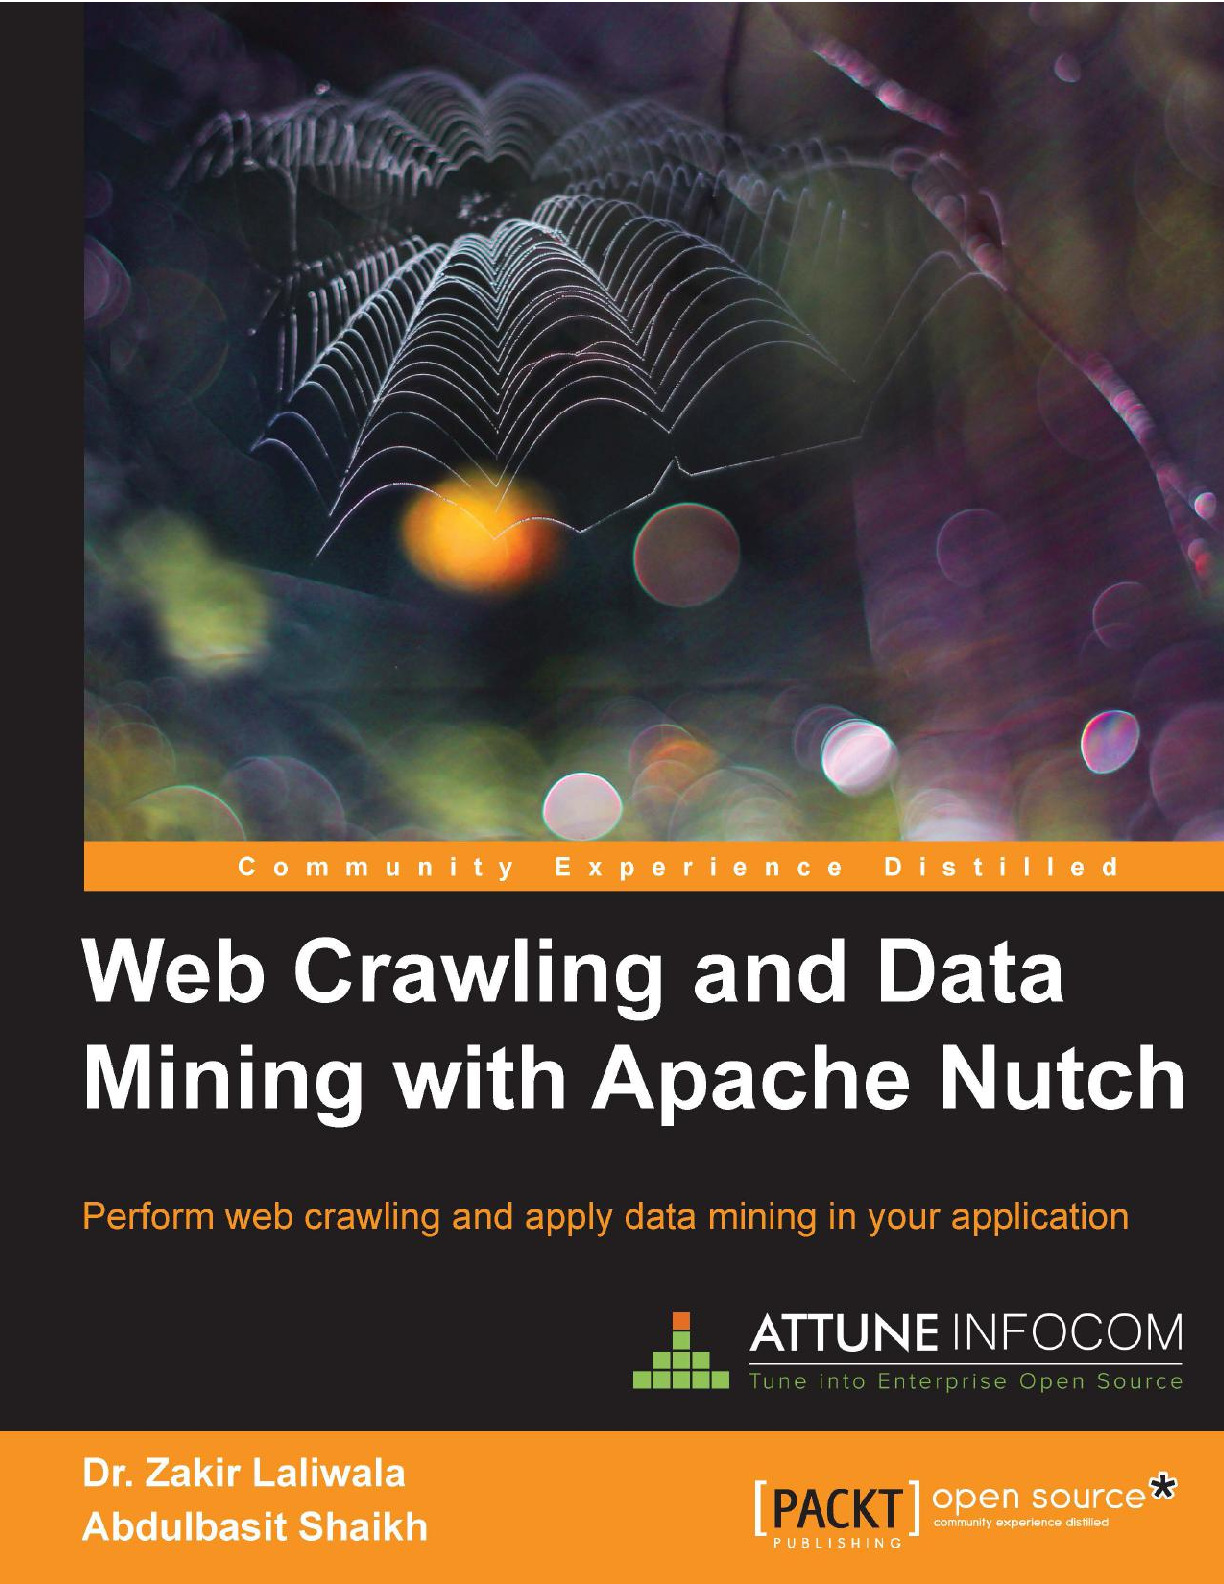 Web Crawling and Data Mining with Apache Nutch